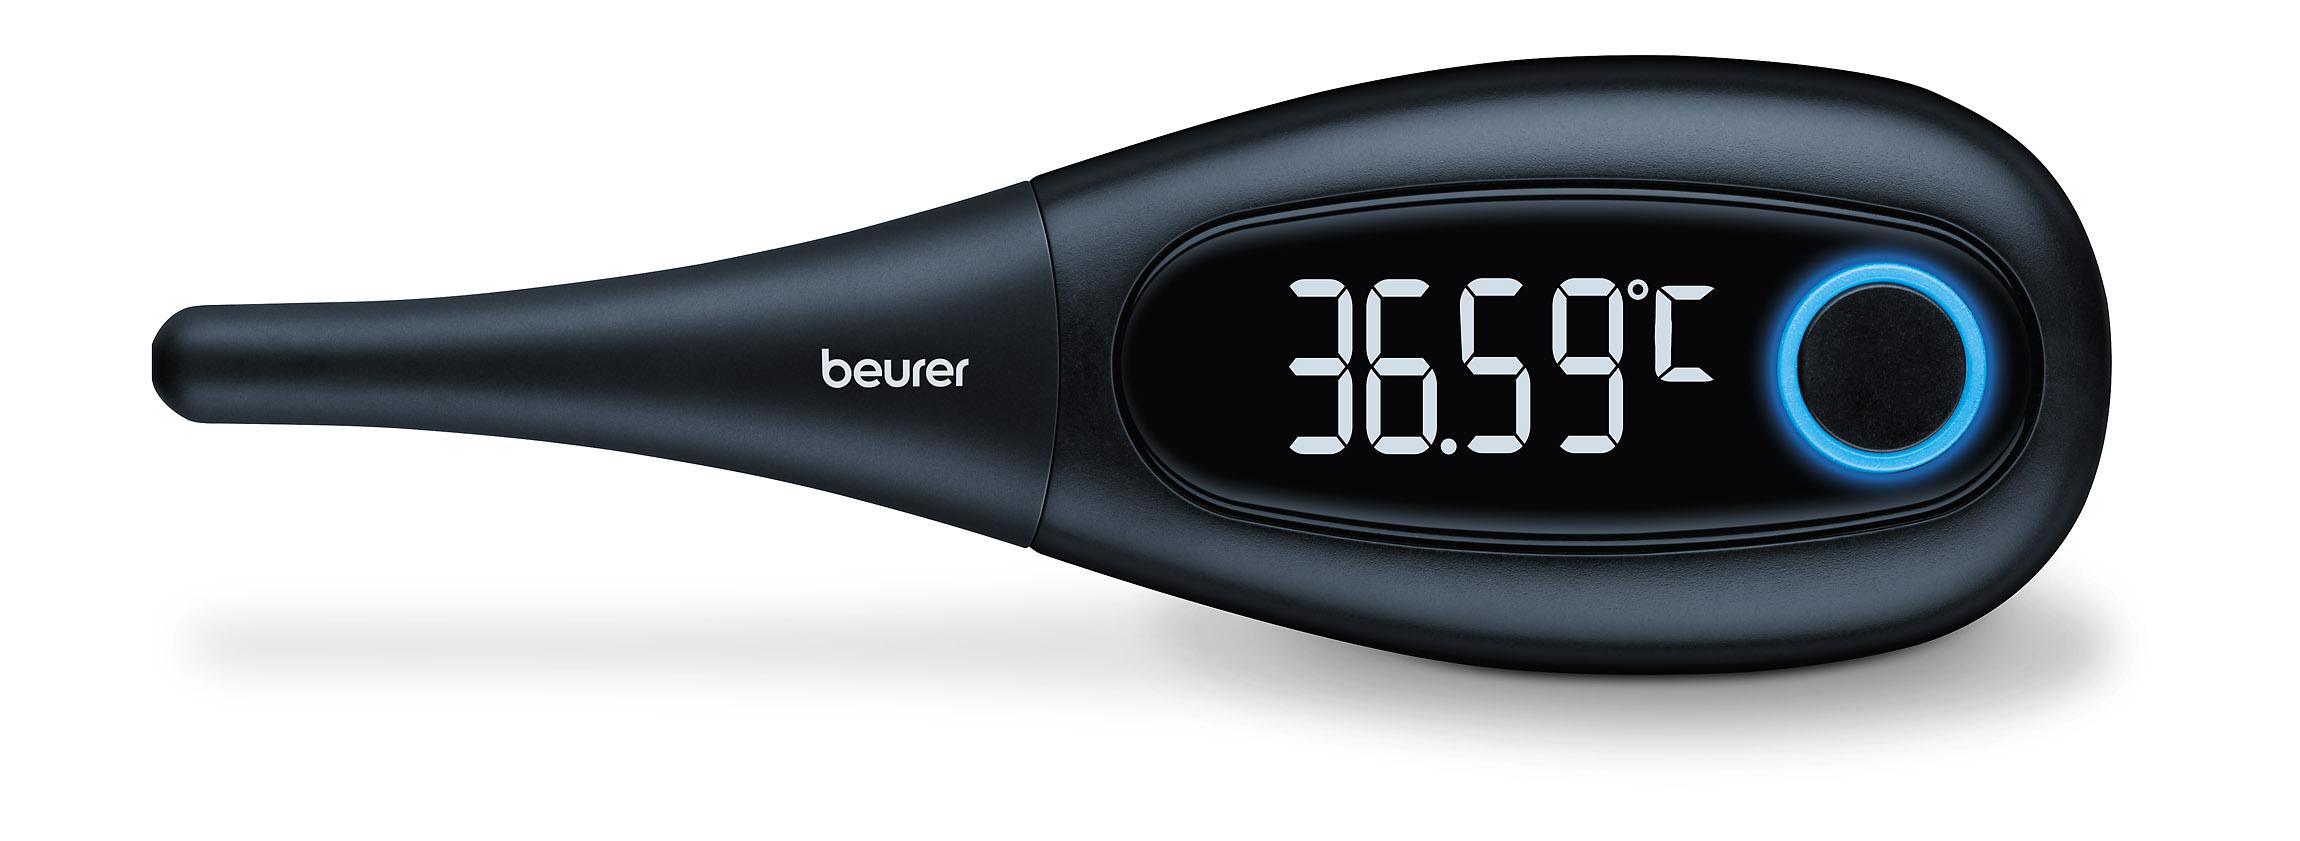 Beurer basal thermometer OT 30 – Muslim Medical Services